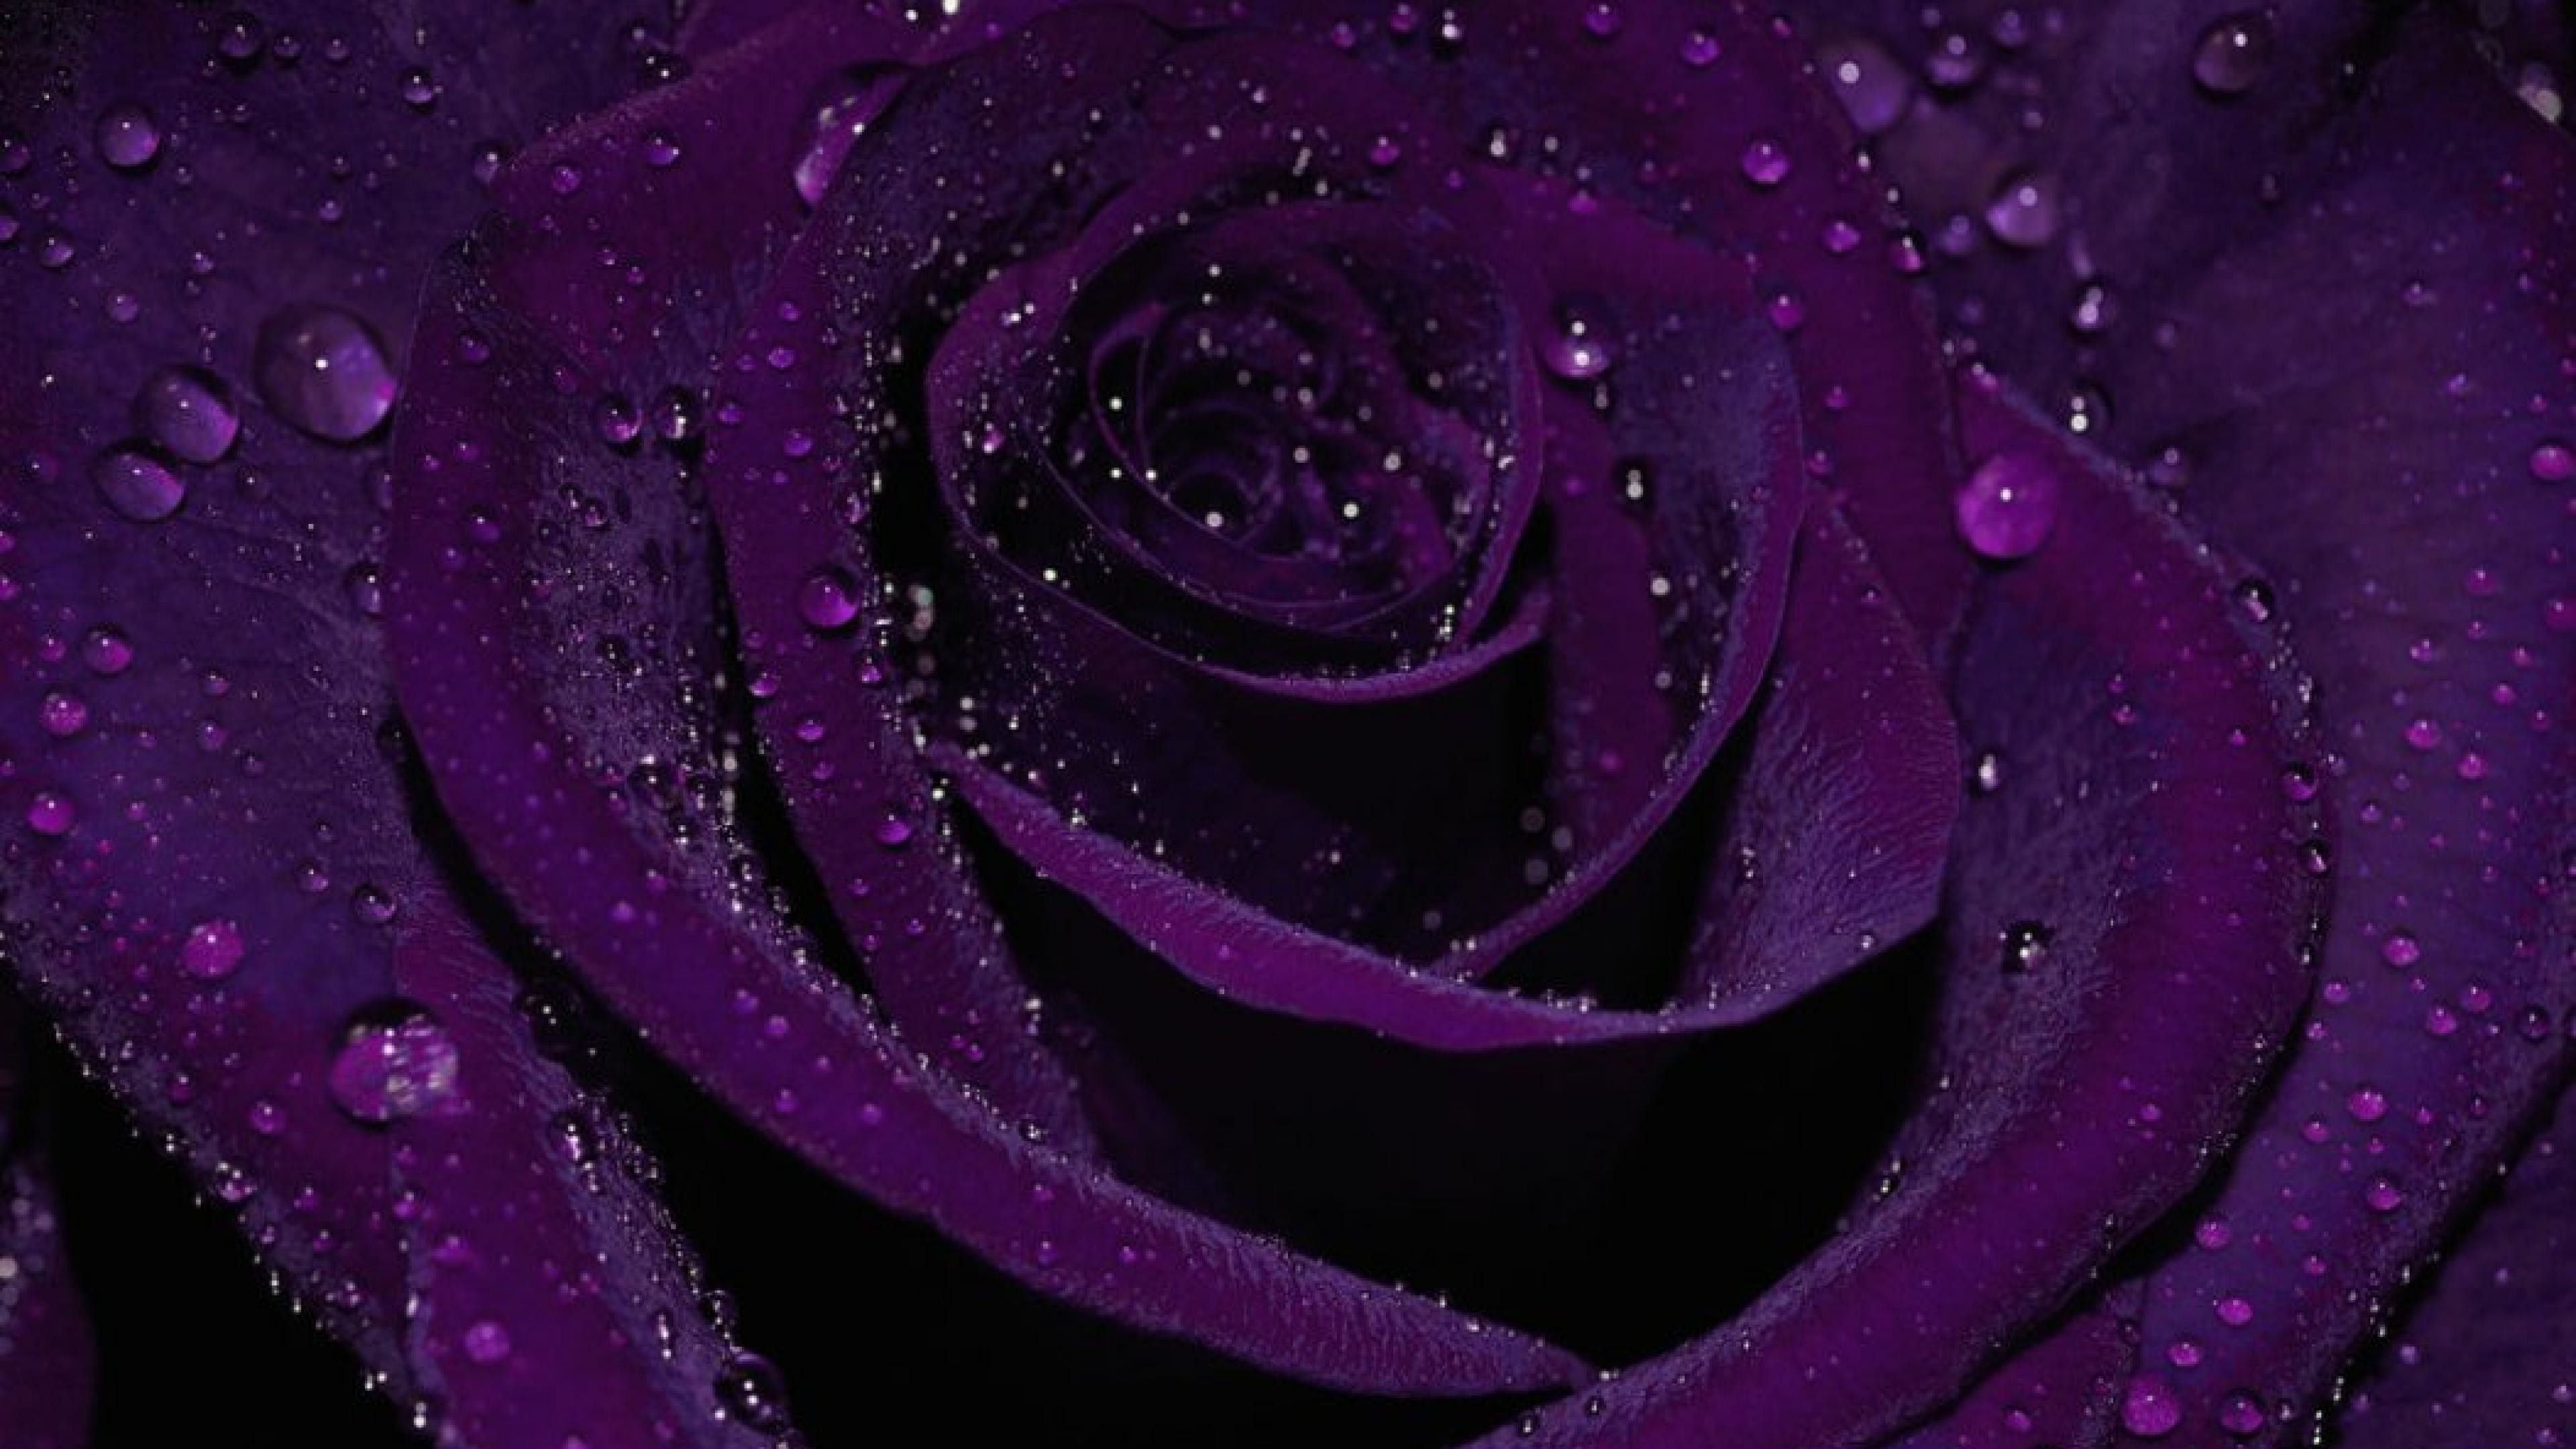 Purple Rose Wallpaper Images Browse 154857 Stock Photos  Vectors Free  Download with Trial  Shutterstock